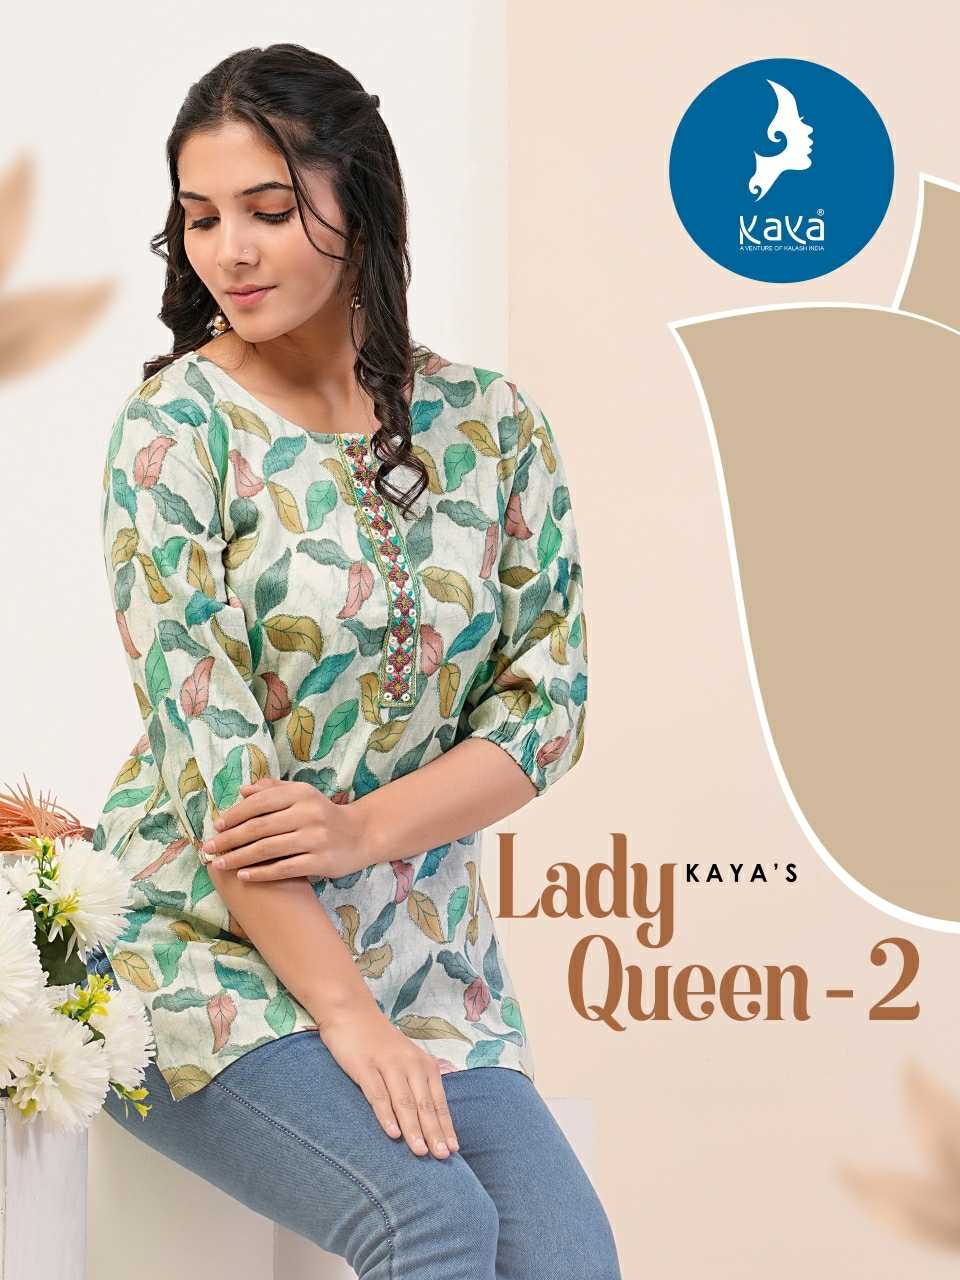 kaya lady queen vol 2 stitched comfy wear print girls short top